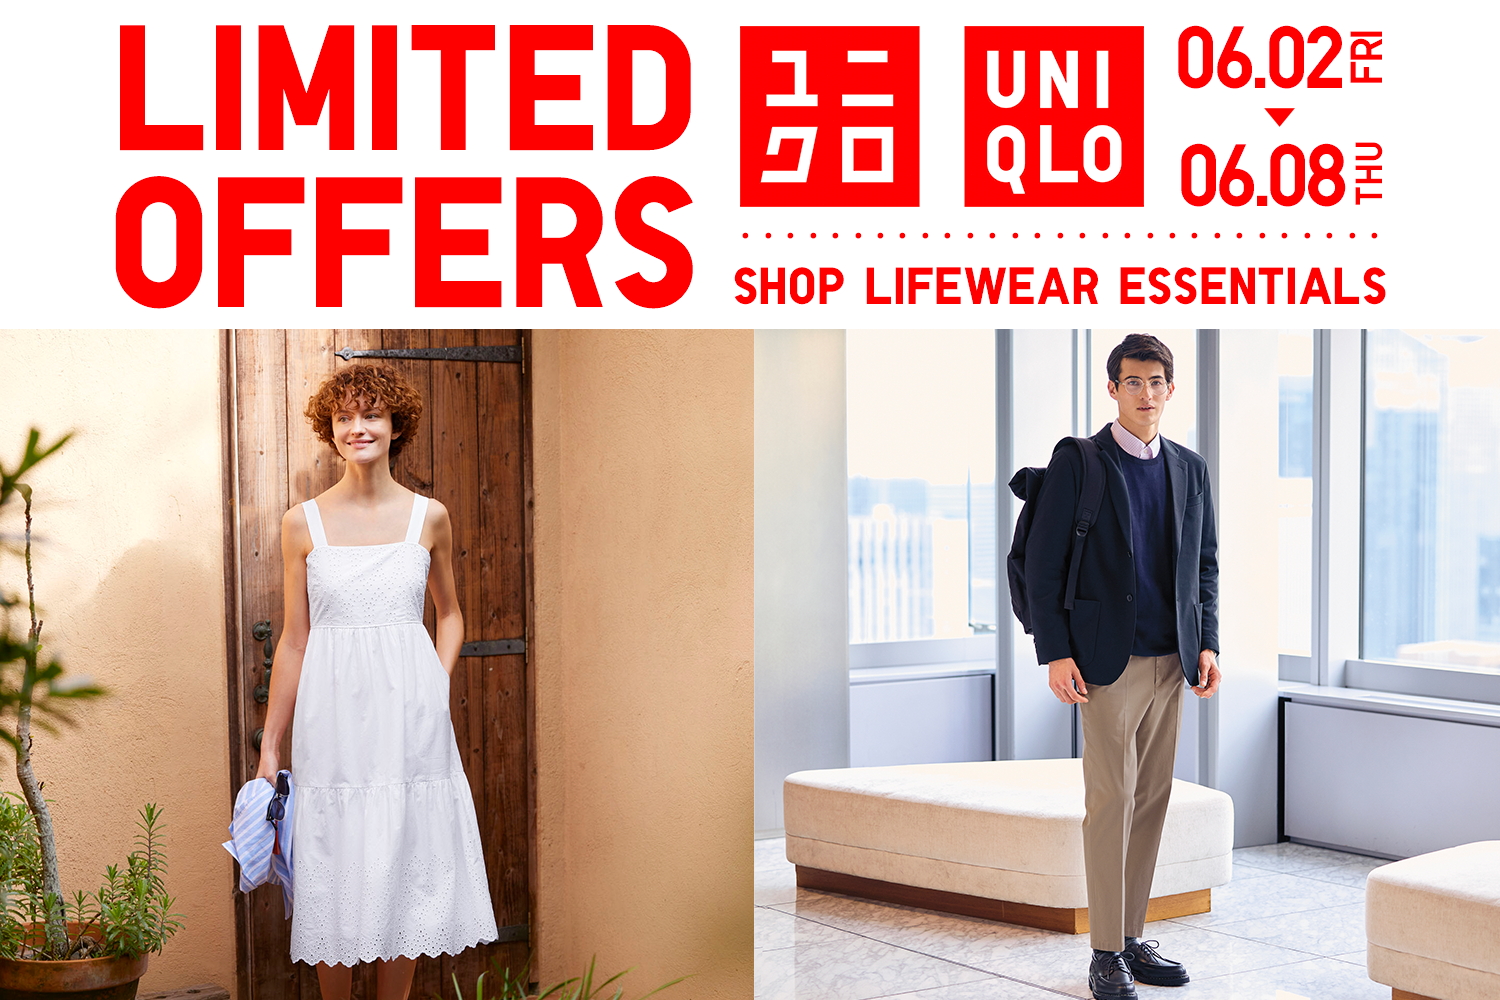 Transform Your Summer With UNIQLO AIRism